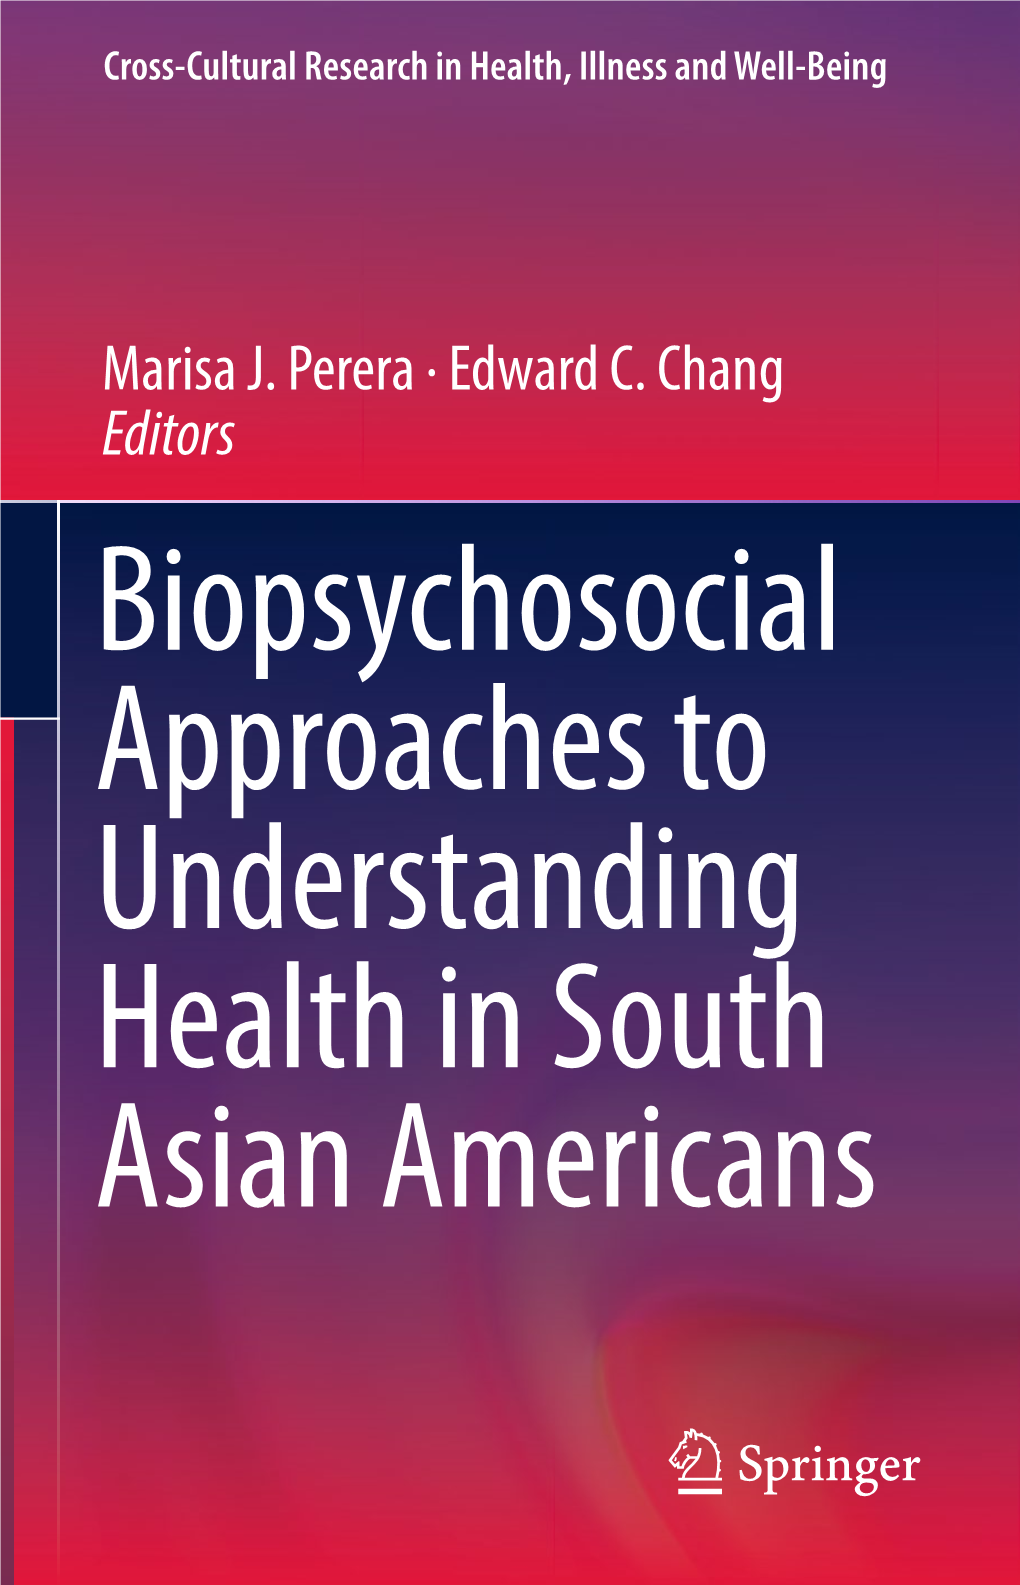 Biopsychosocial Approaches to Understanding Health in South Asian Americans Cross-Cultural Research in Health, Illness and Well-Being